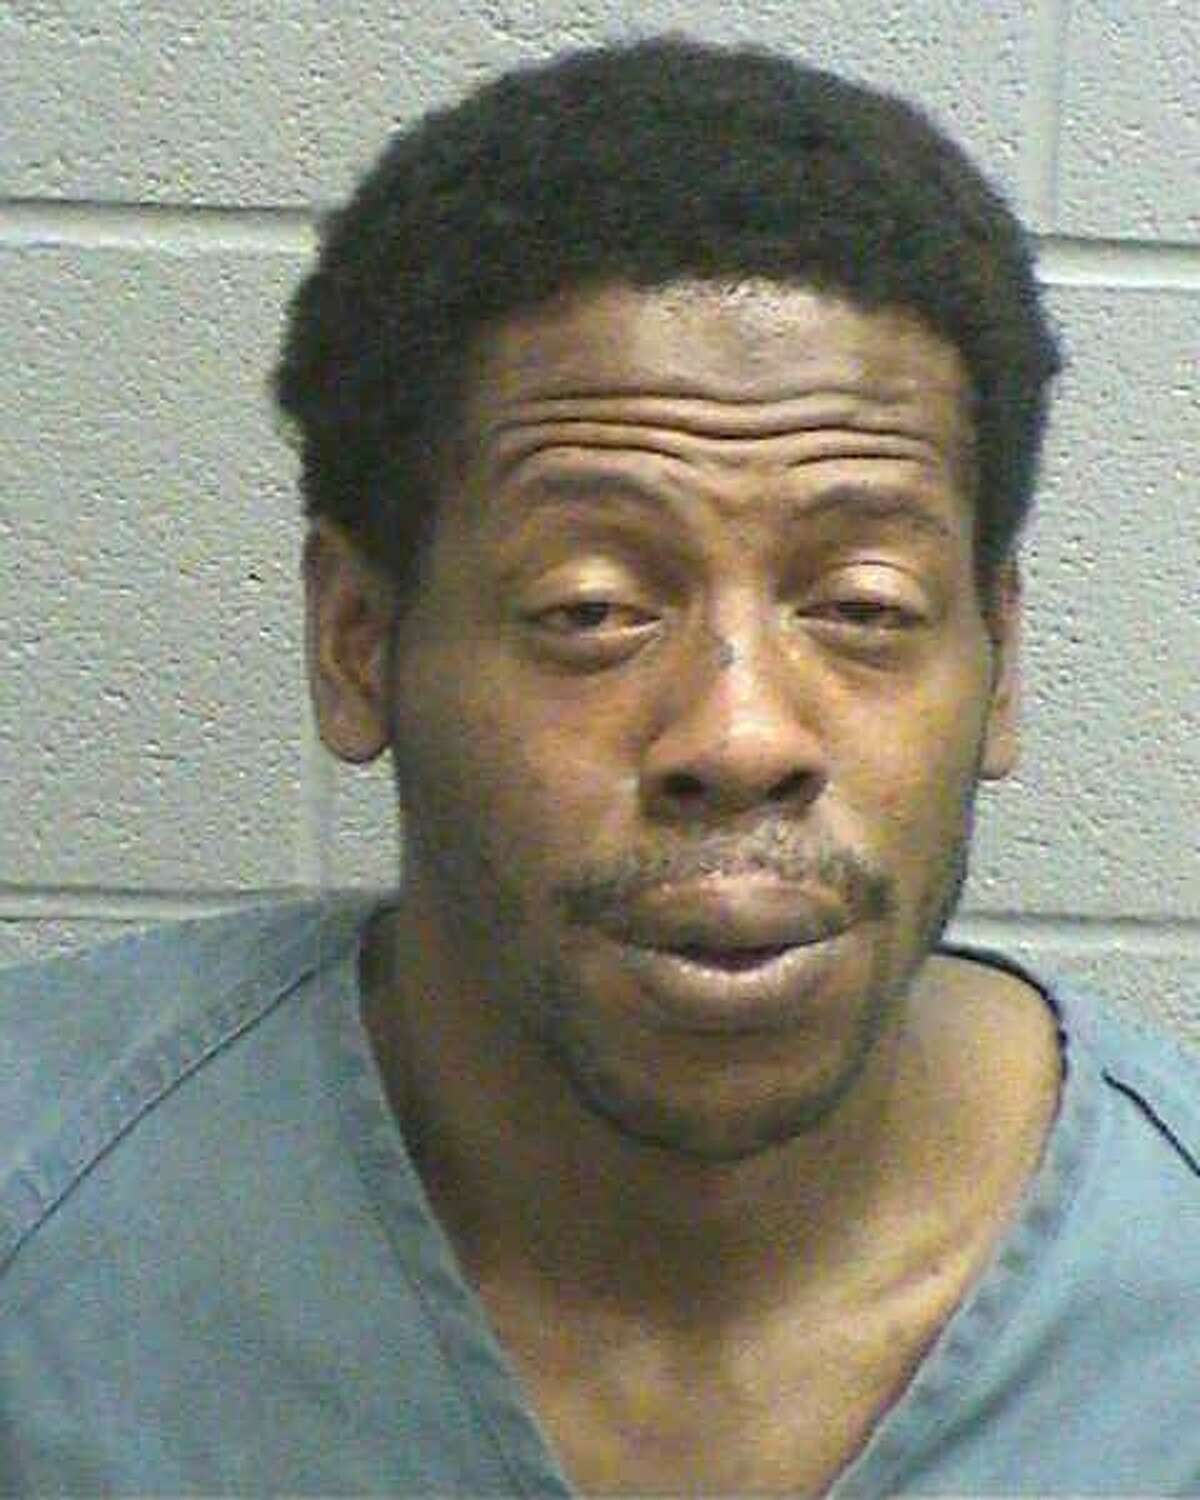 Terrance Tremayne Belcher, 36, of Midland, was arrested May 23 on third-degree felony charges of assault on a public servant and evading arrest or detention, and class A misdemeanor charges of resisting arrest, search or transport and assault-family violence causing bodily injury.Belcher fled a police officer's inquiries before eventually assaulting the officer several times. The officer had to use pepper spray and physical force to subdue him.If convicted, Belcher faces up to 10 years in prison for each third-degree felony and up to one year for each misdemeanor charge.